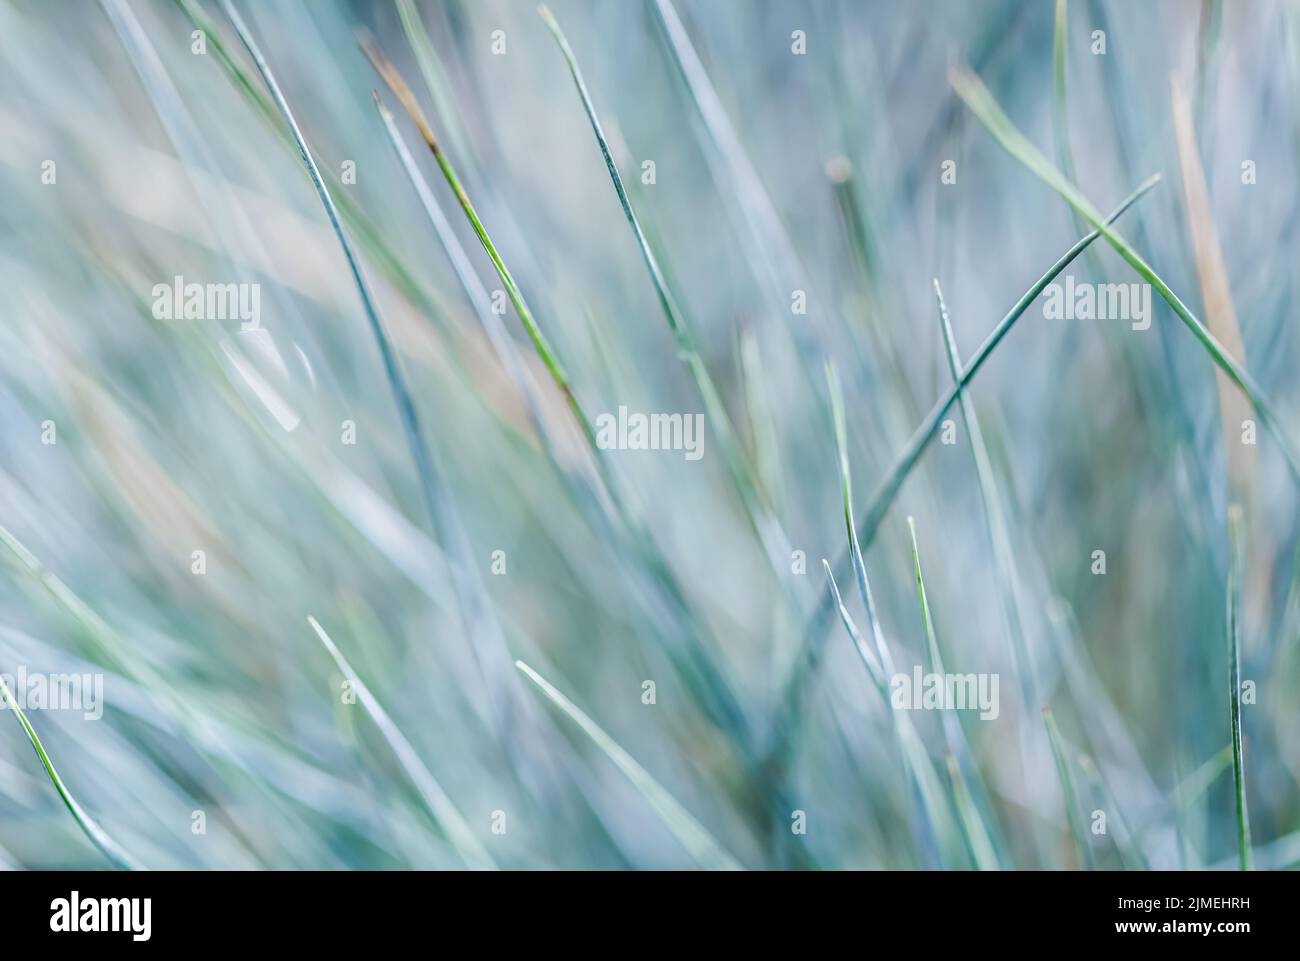 Blurred background, texture, pattern of blue green grass. Extreme bokeh with light reflection Stock Photo